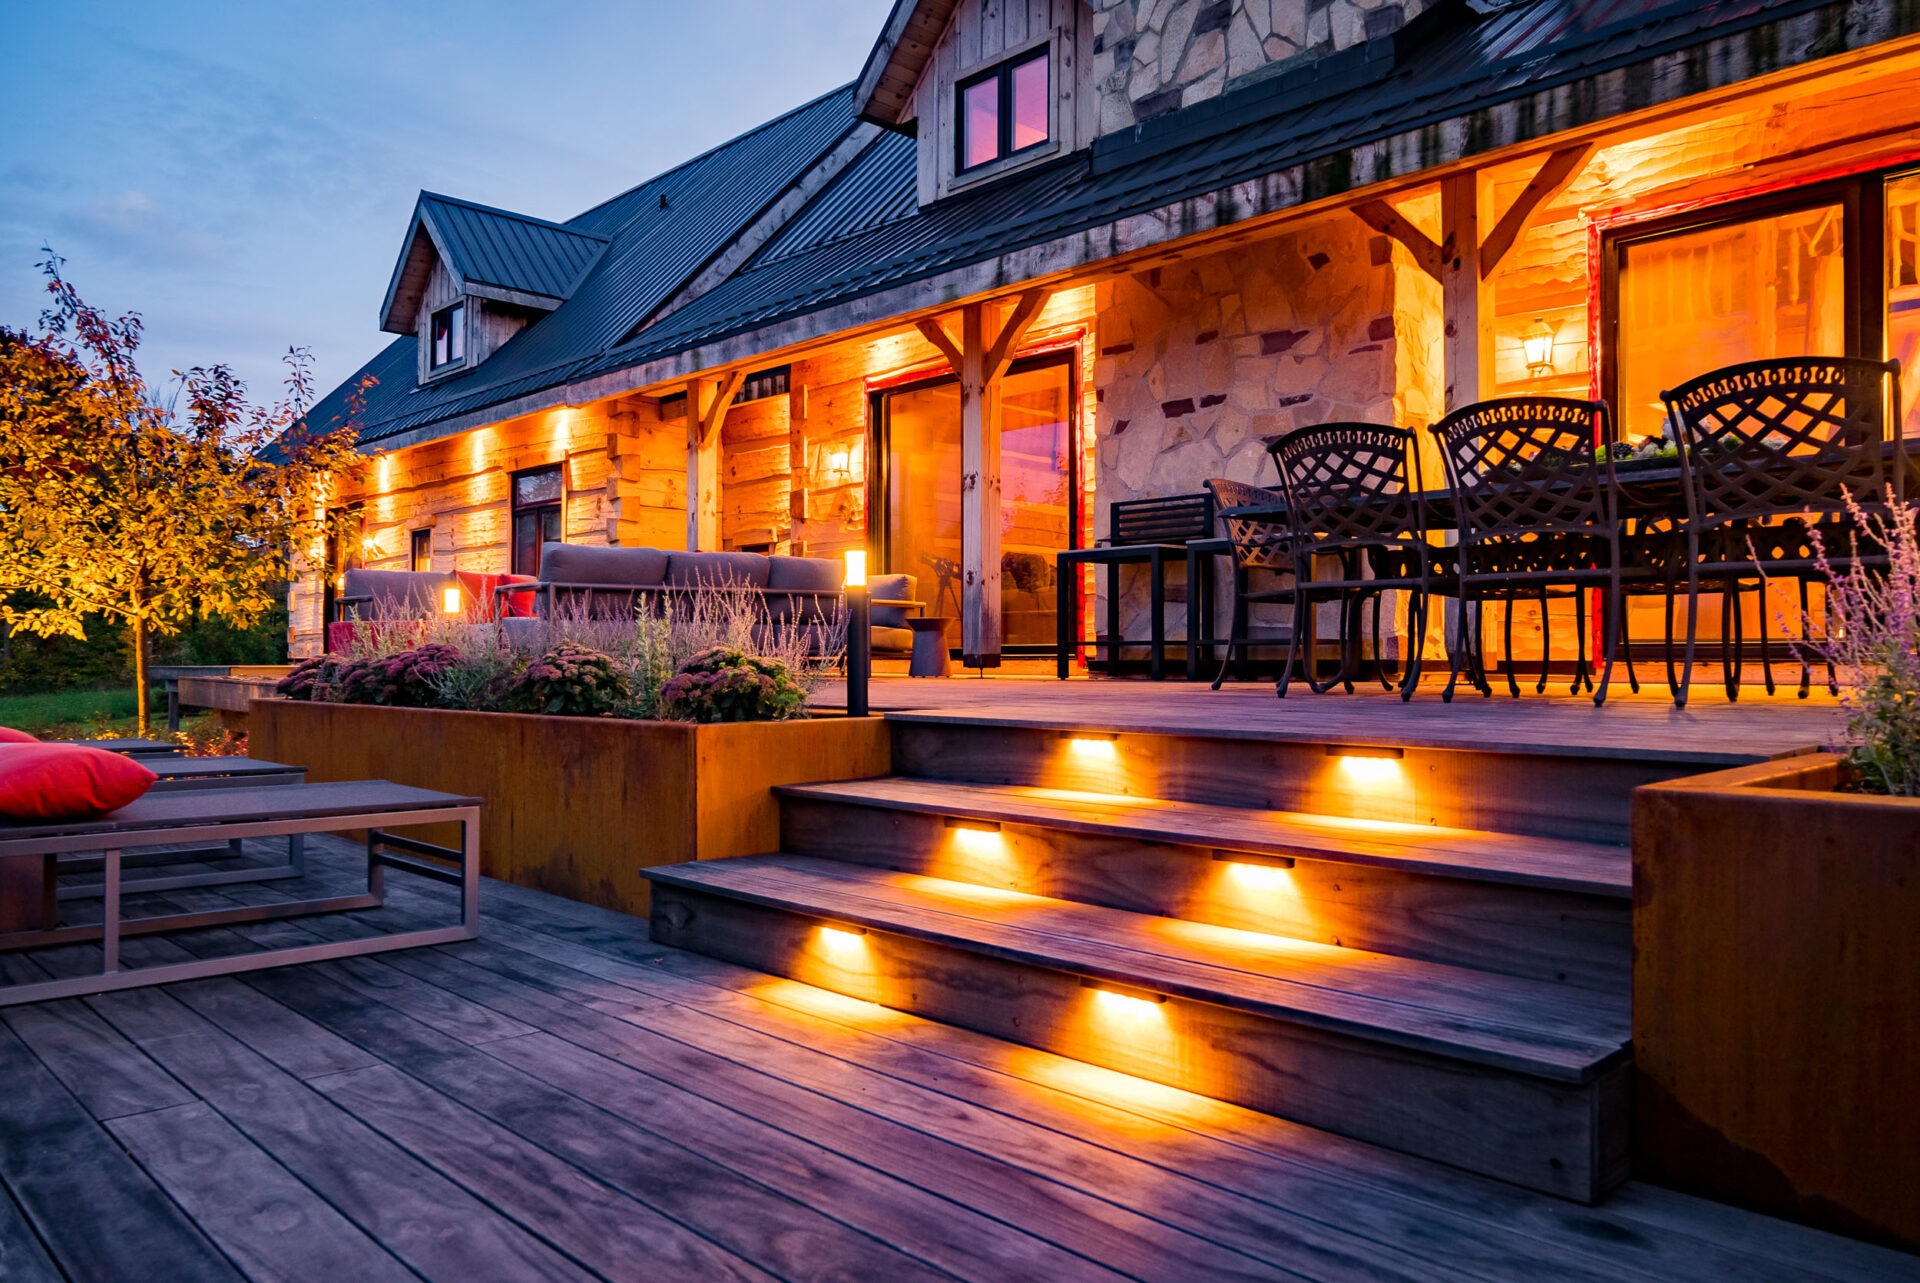 A cozy wooden house with warm interior lighting. An inviting porch is adorned with outdoor furniture, steps with built-in lights, and potted plants. Twilight sets the mood.